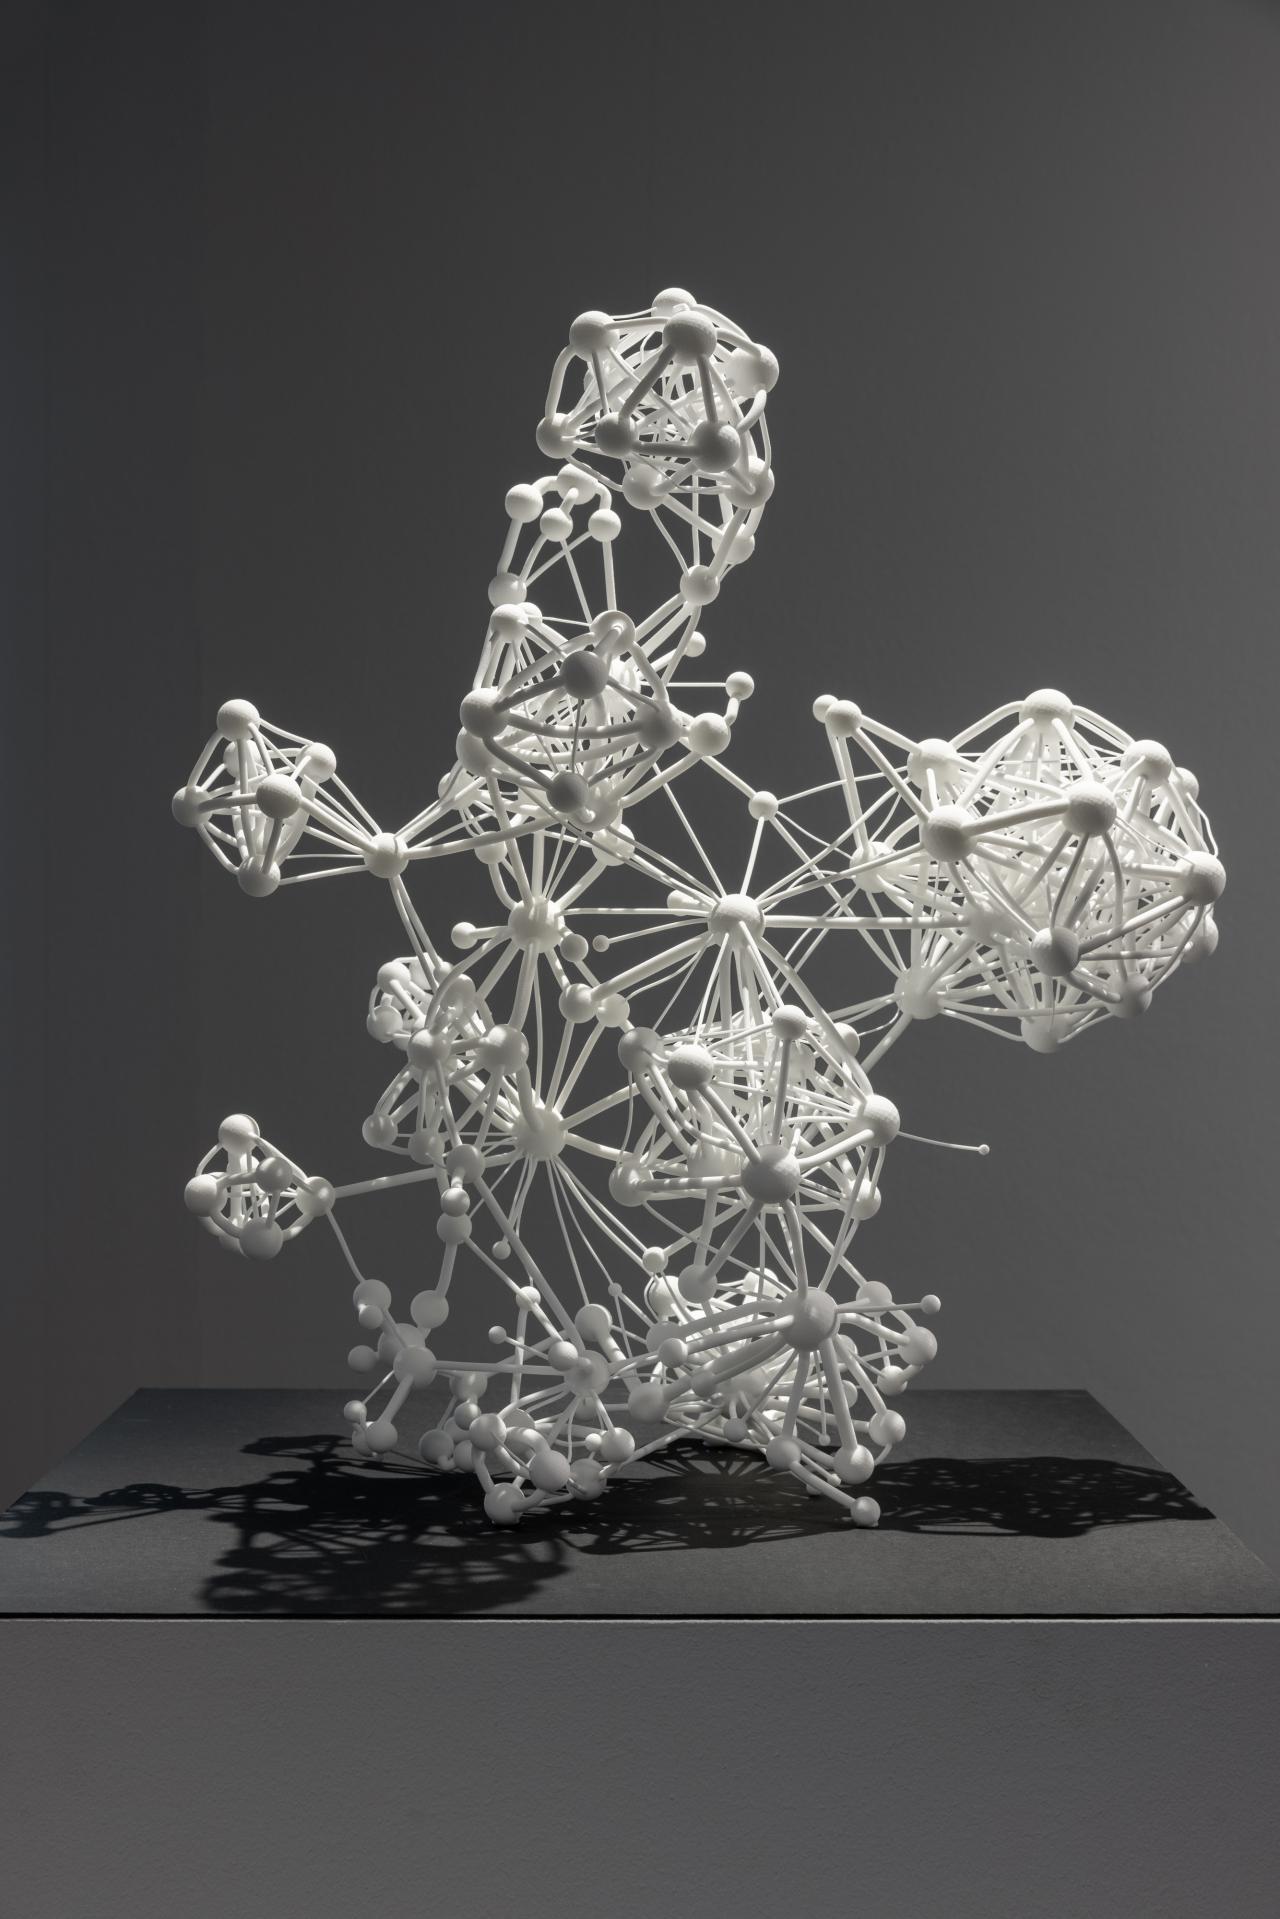 Three-dimensional sculpture of the "Flavor Network" in white